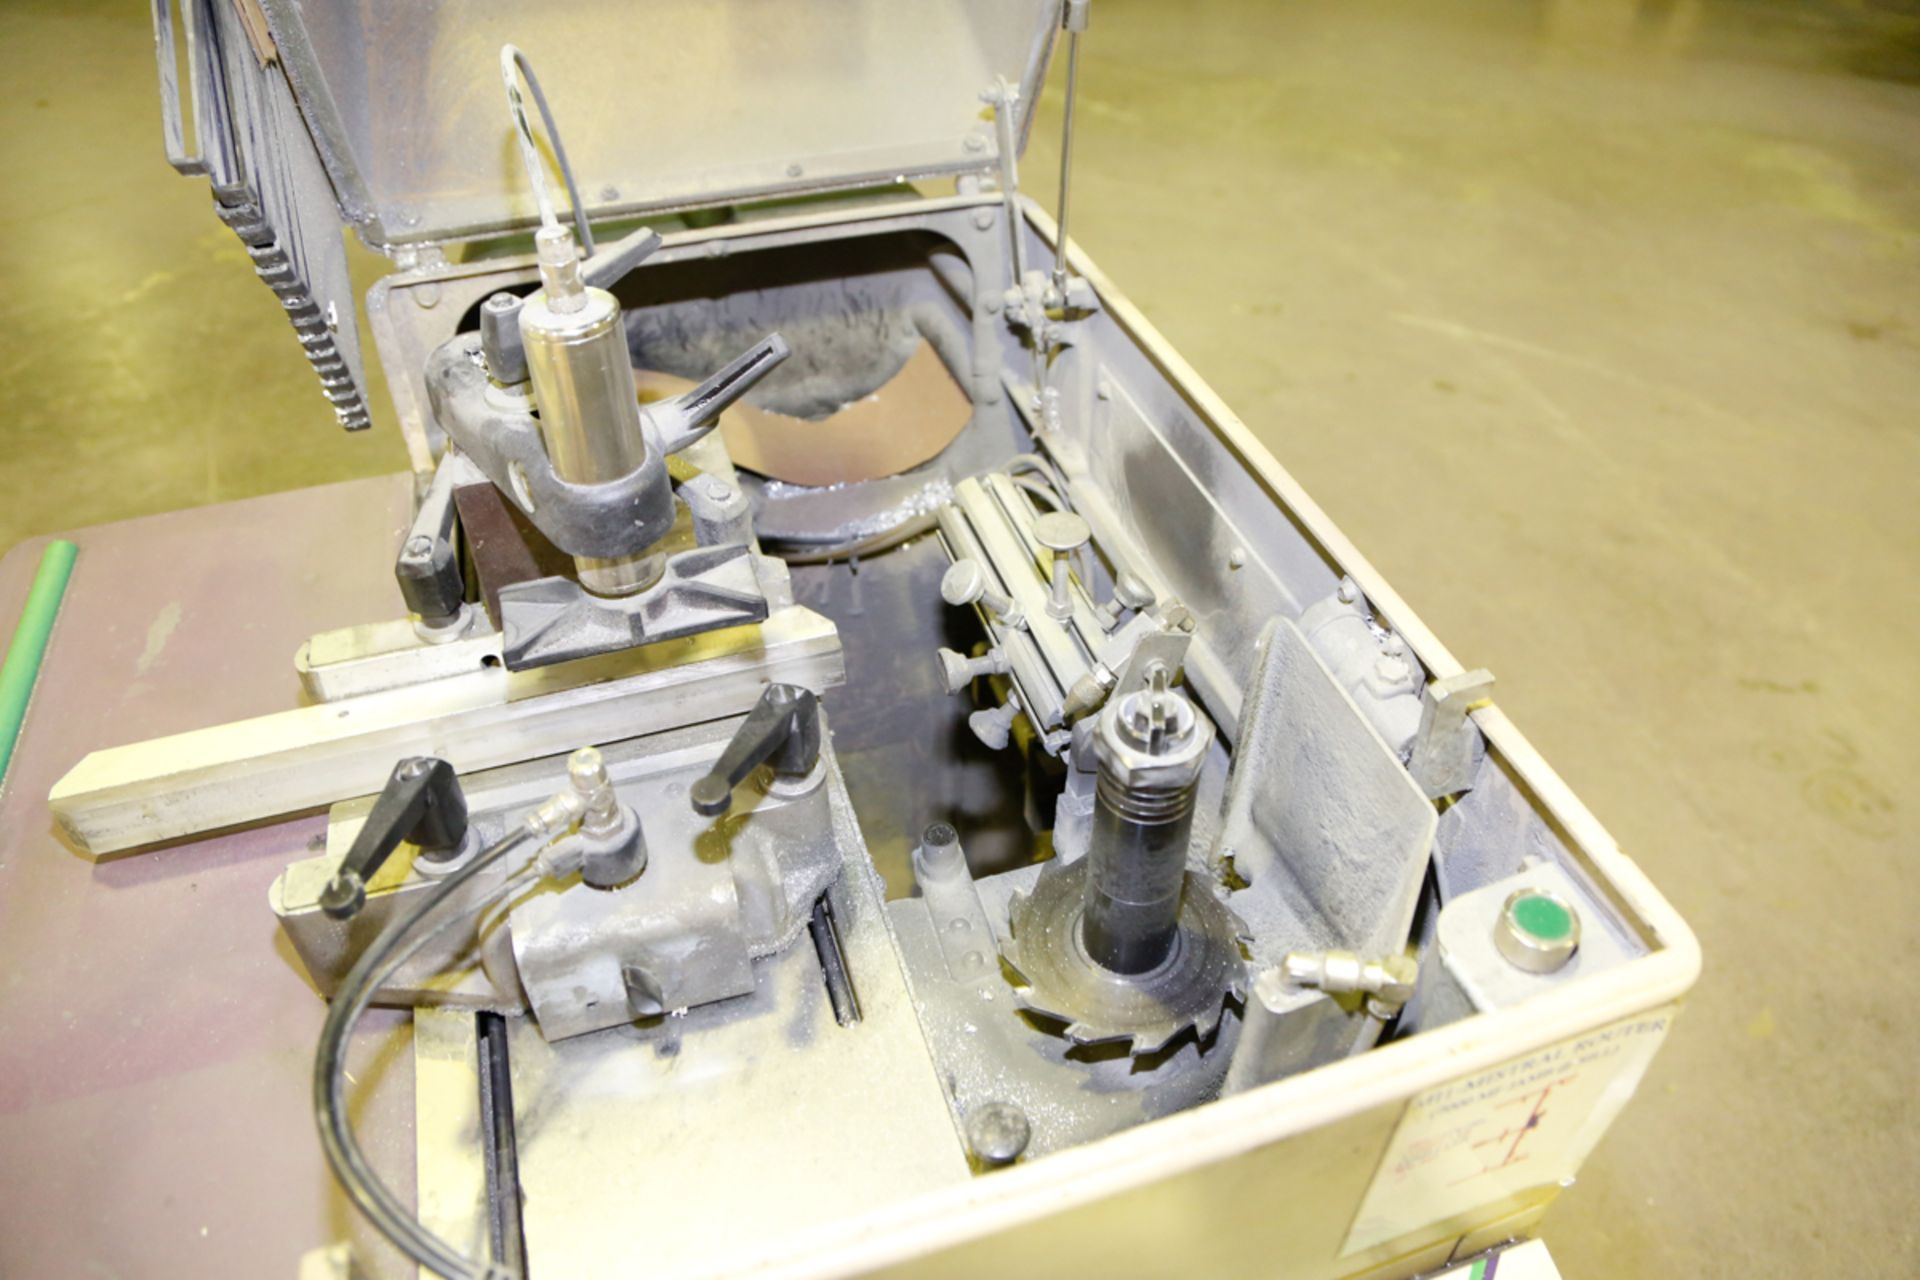 FOM VARIABLE ANGLE END-MILLING MACHINE MOD. MISTRAL 26A, AUTO. CLAMPING & FEED (2001), S/N: 025256 - Image 2 of 3